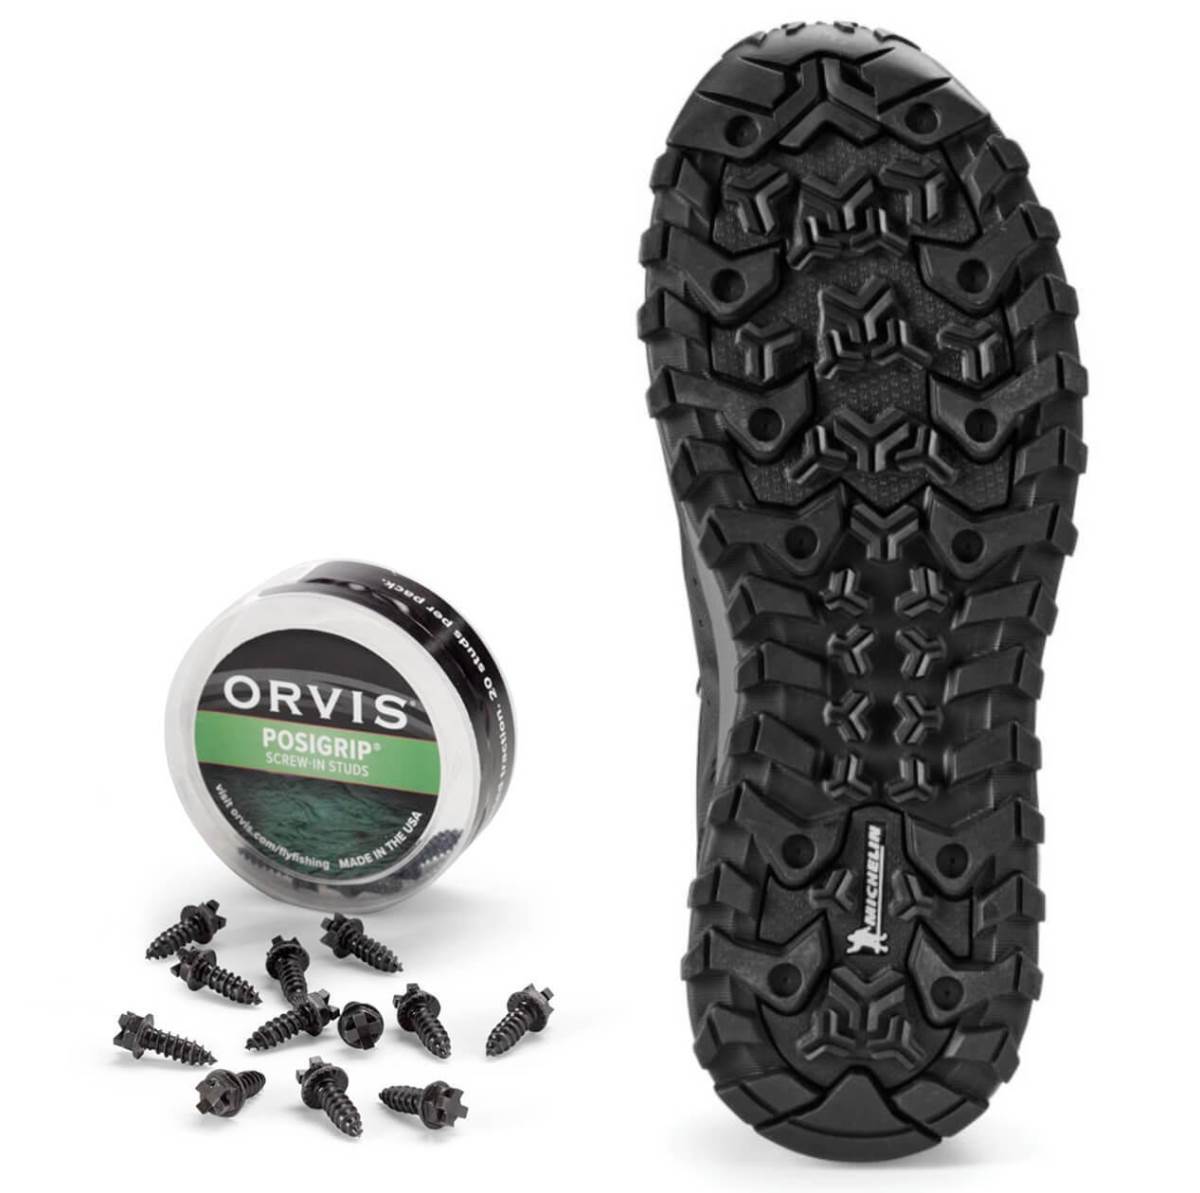 tread pattern on Orvis PRO Wading Boots and screw in stud attachments